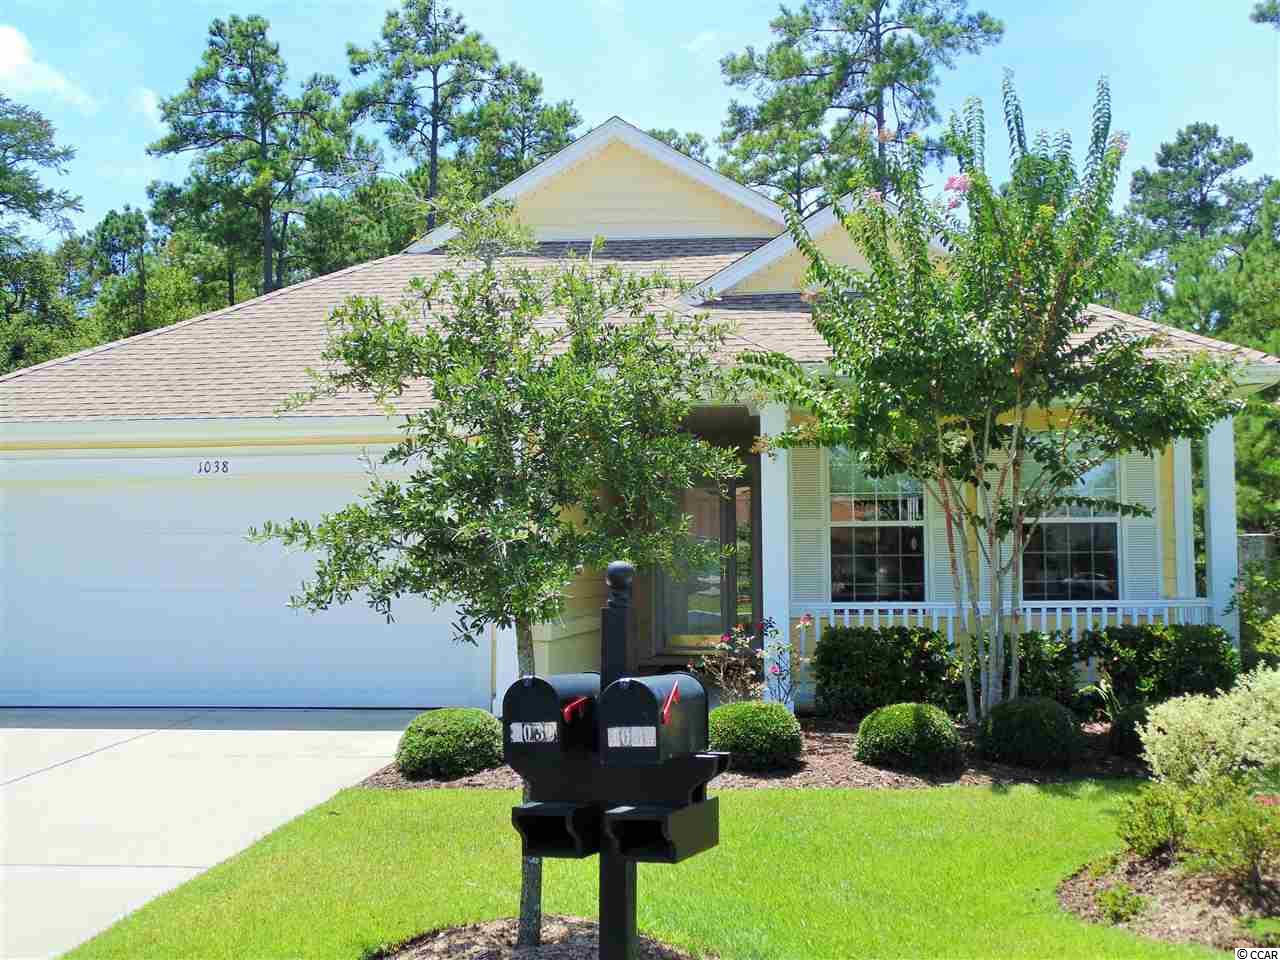 1038 Nittany Ct. Murrells Inlet, SC 29576